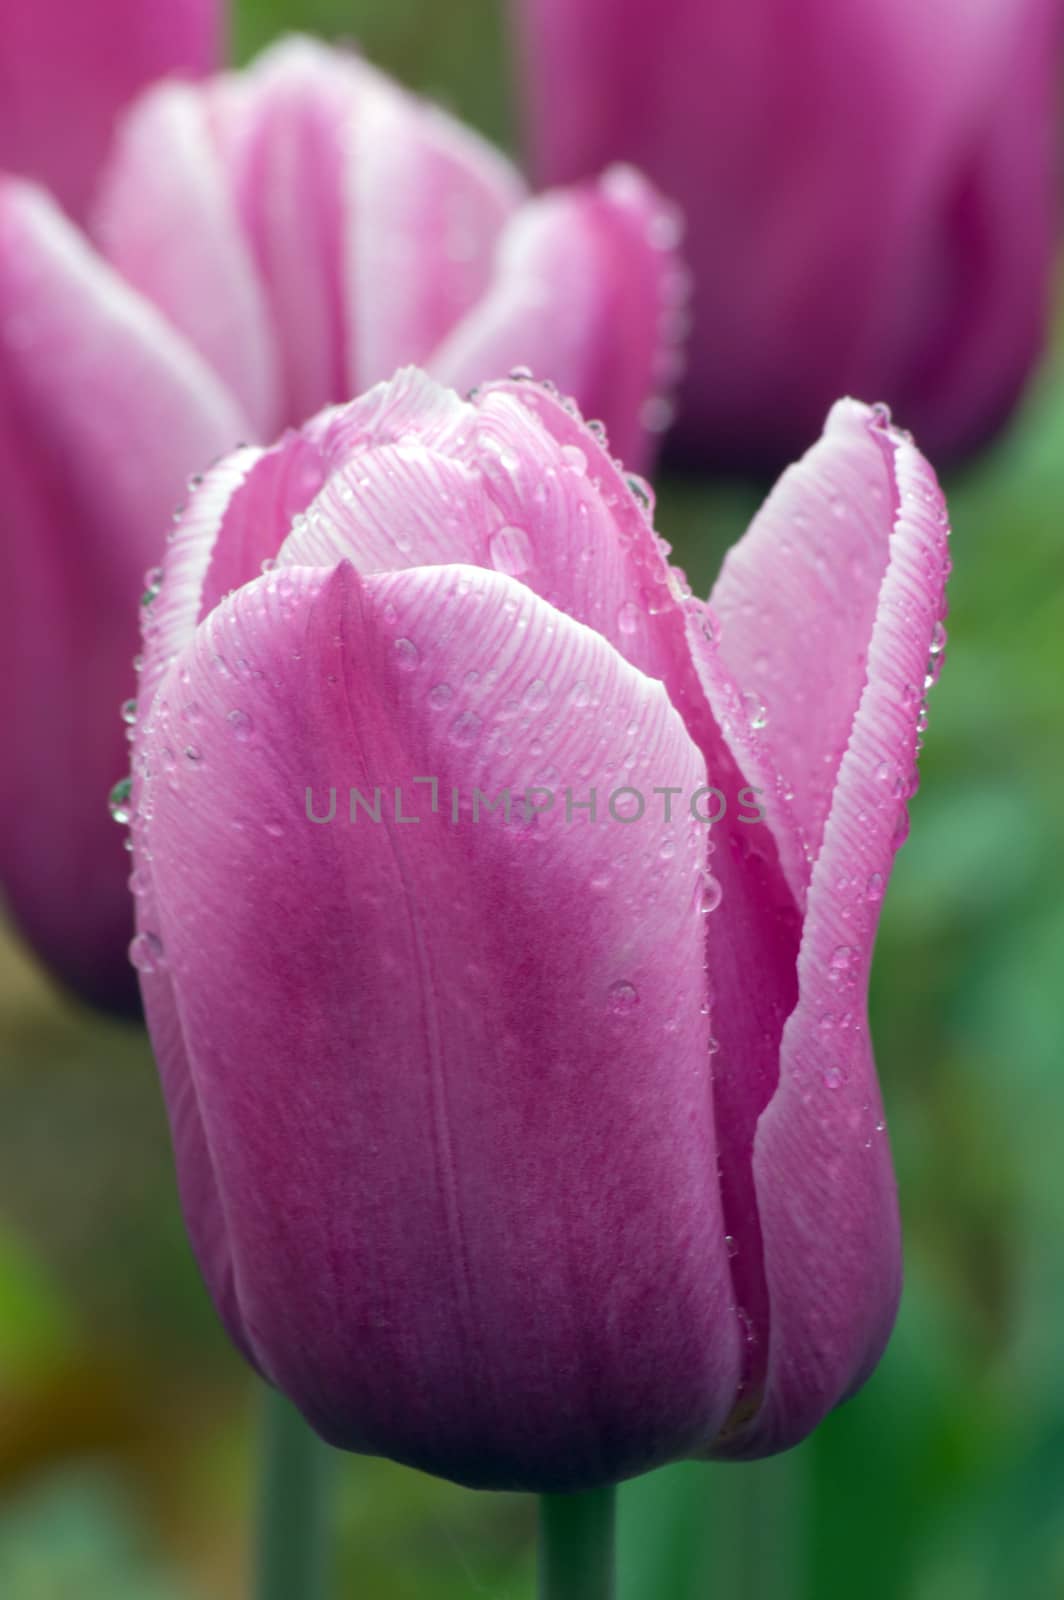 Menton tulip by PavelS